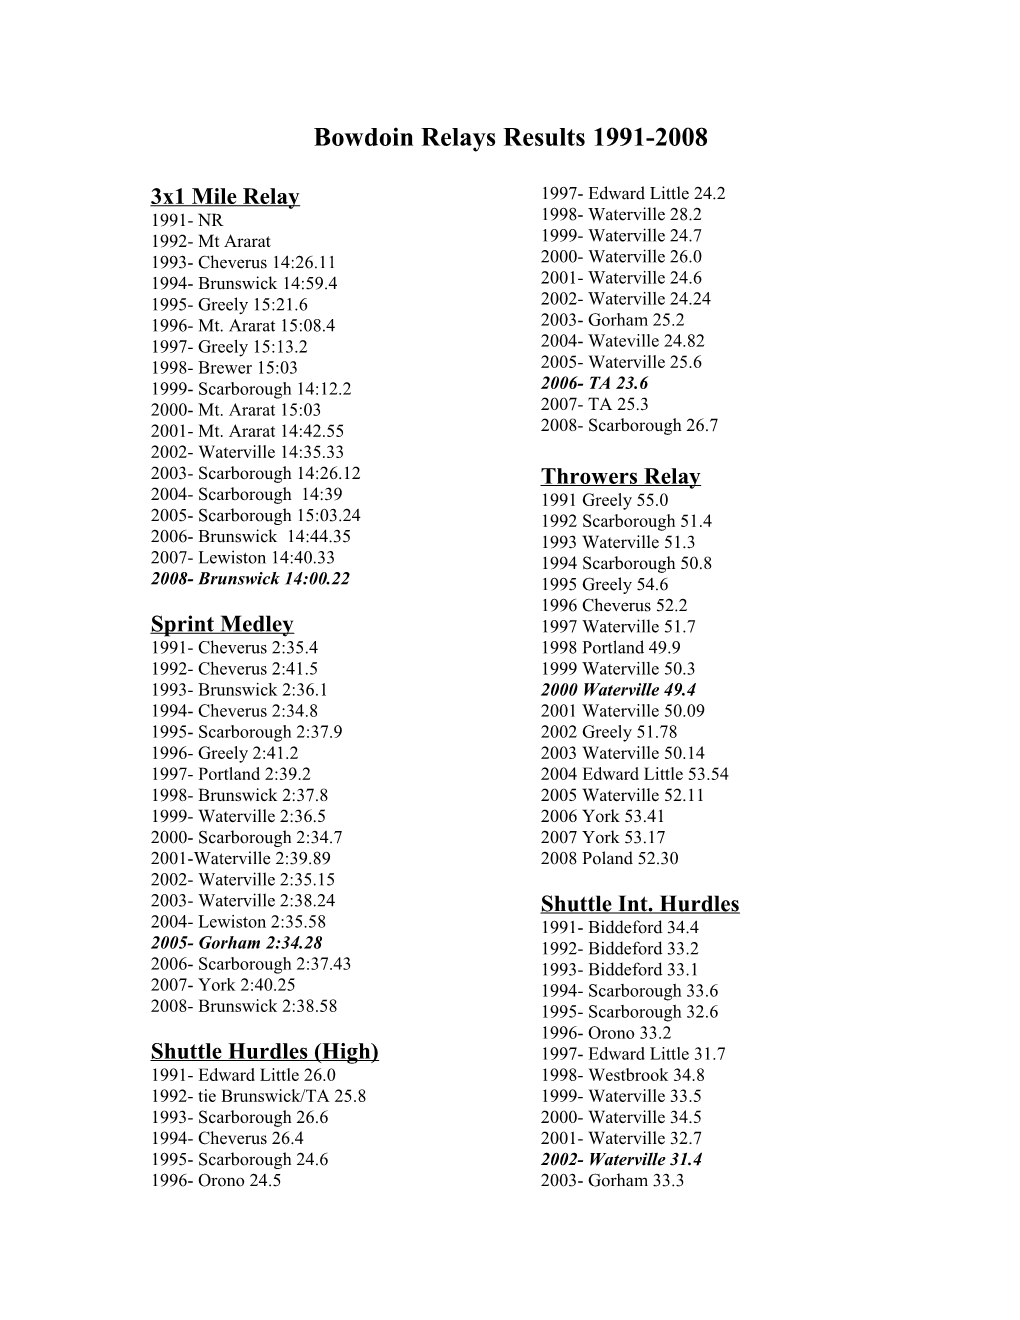 Bowdoin Relays Results 1991-2005